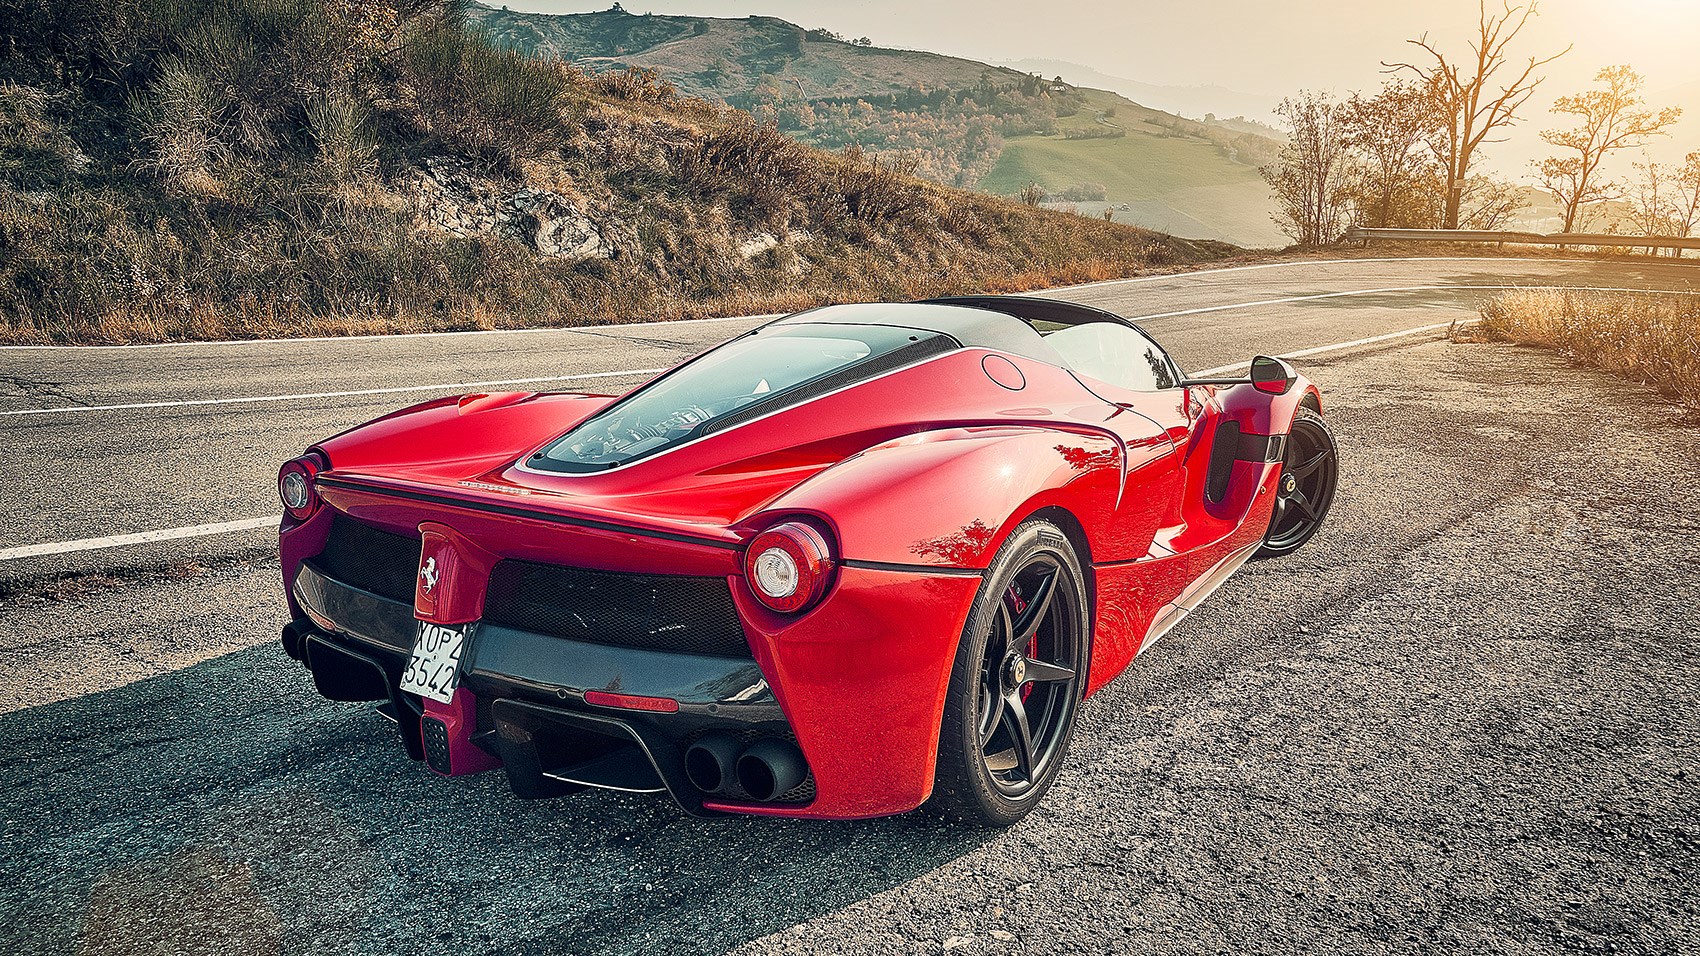 LaFerrari Aperta review by CAR magazine: specs, prices, dimensions and info